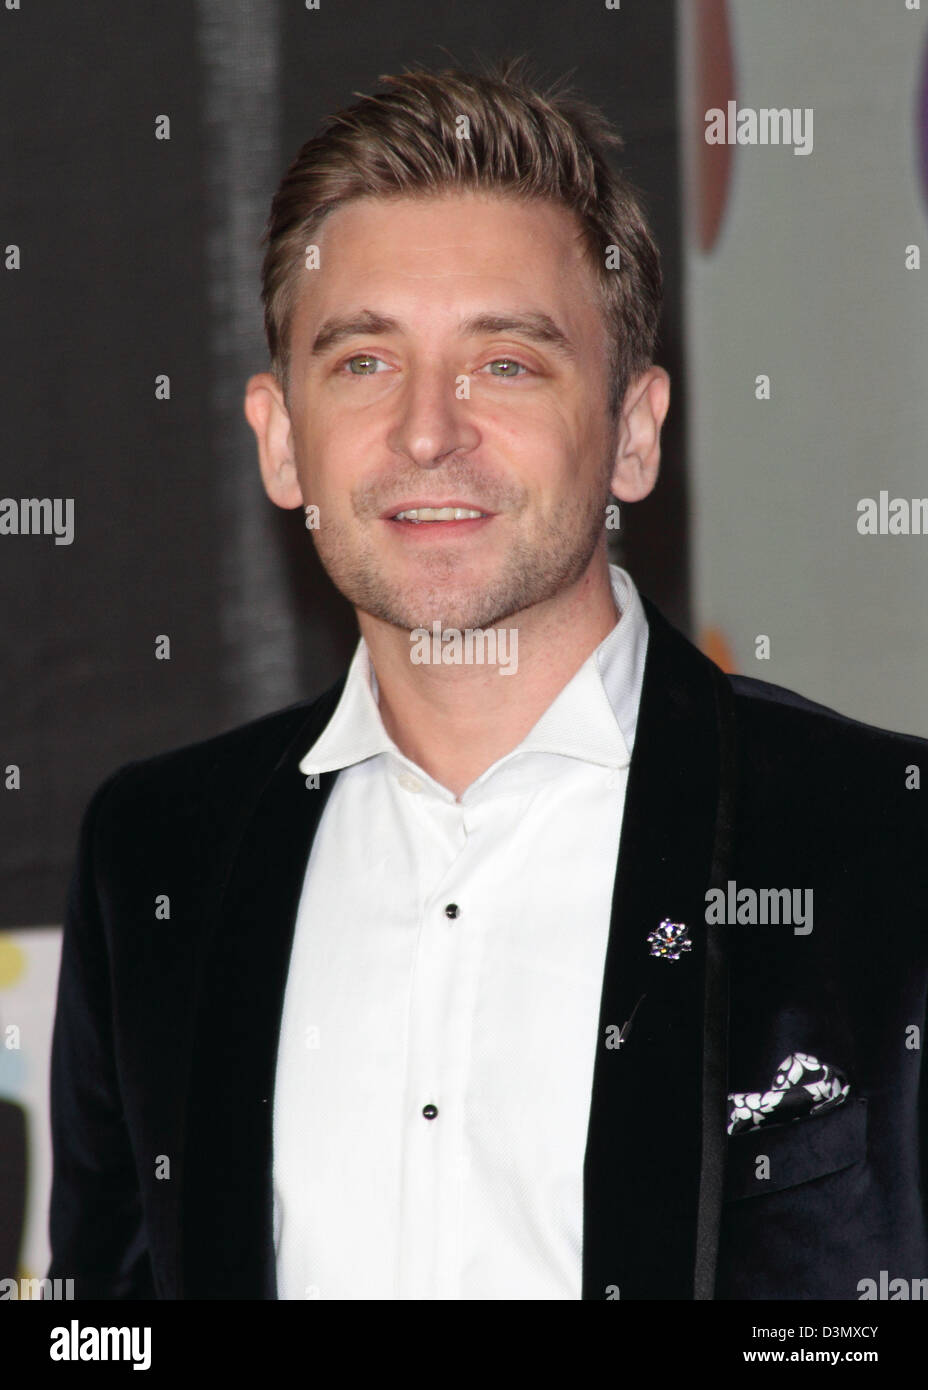 London, UK. 20th February 2013. DJ Fresh at the The 2013 Brit Awards at the O2 Arena, London - February 20th 2013  Photo by Keith Mayhew/ Alamy Live News Stock Photo